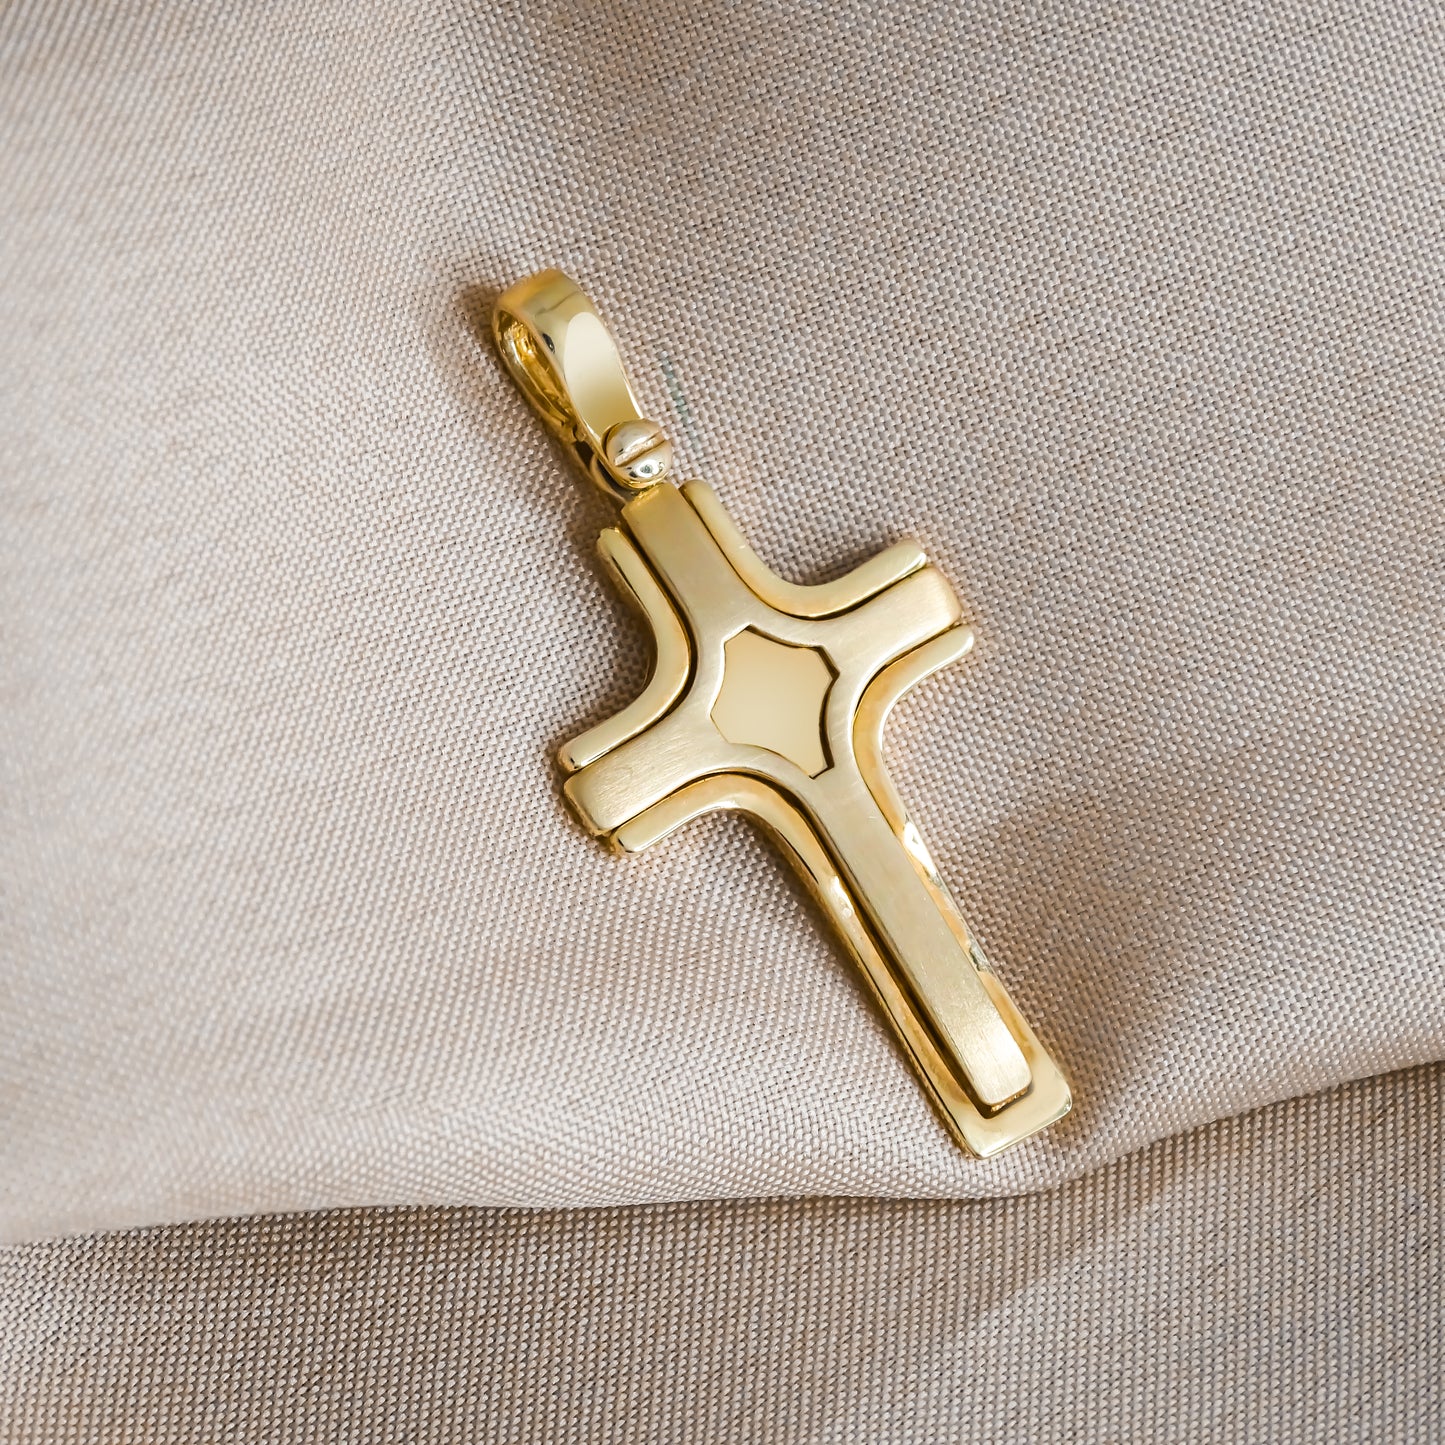 3.5cm Polished and Brushed Designed Cross Pendant in 9ct Yellow Gold